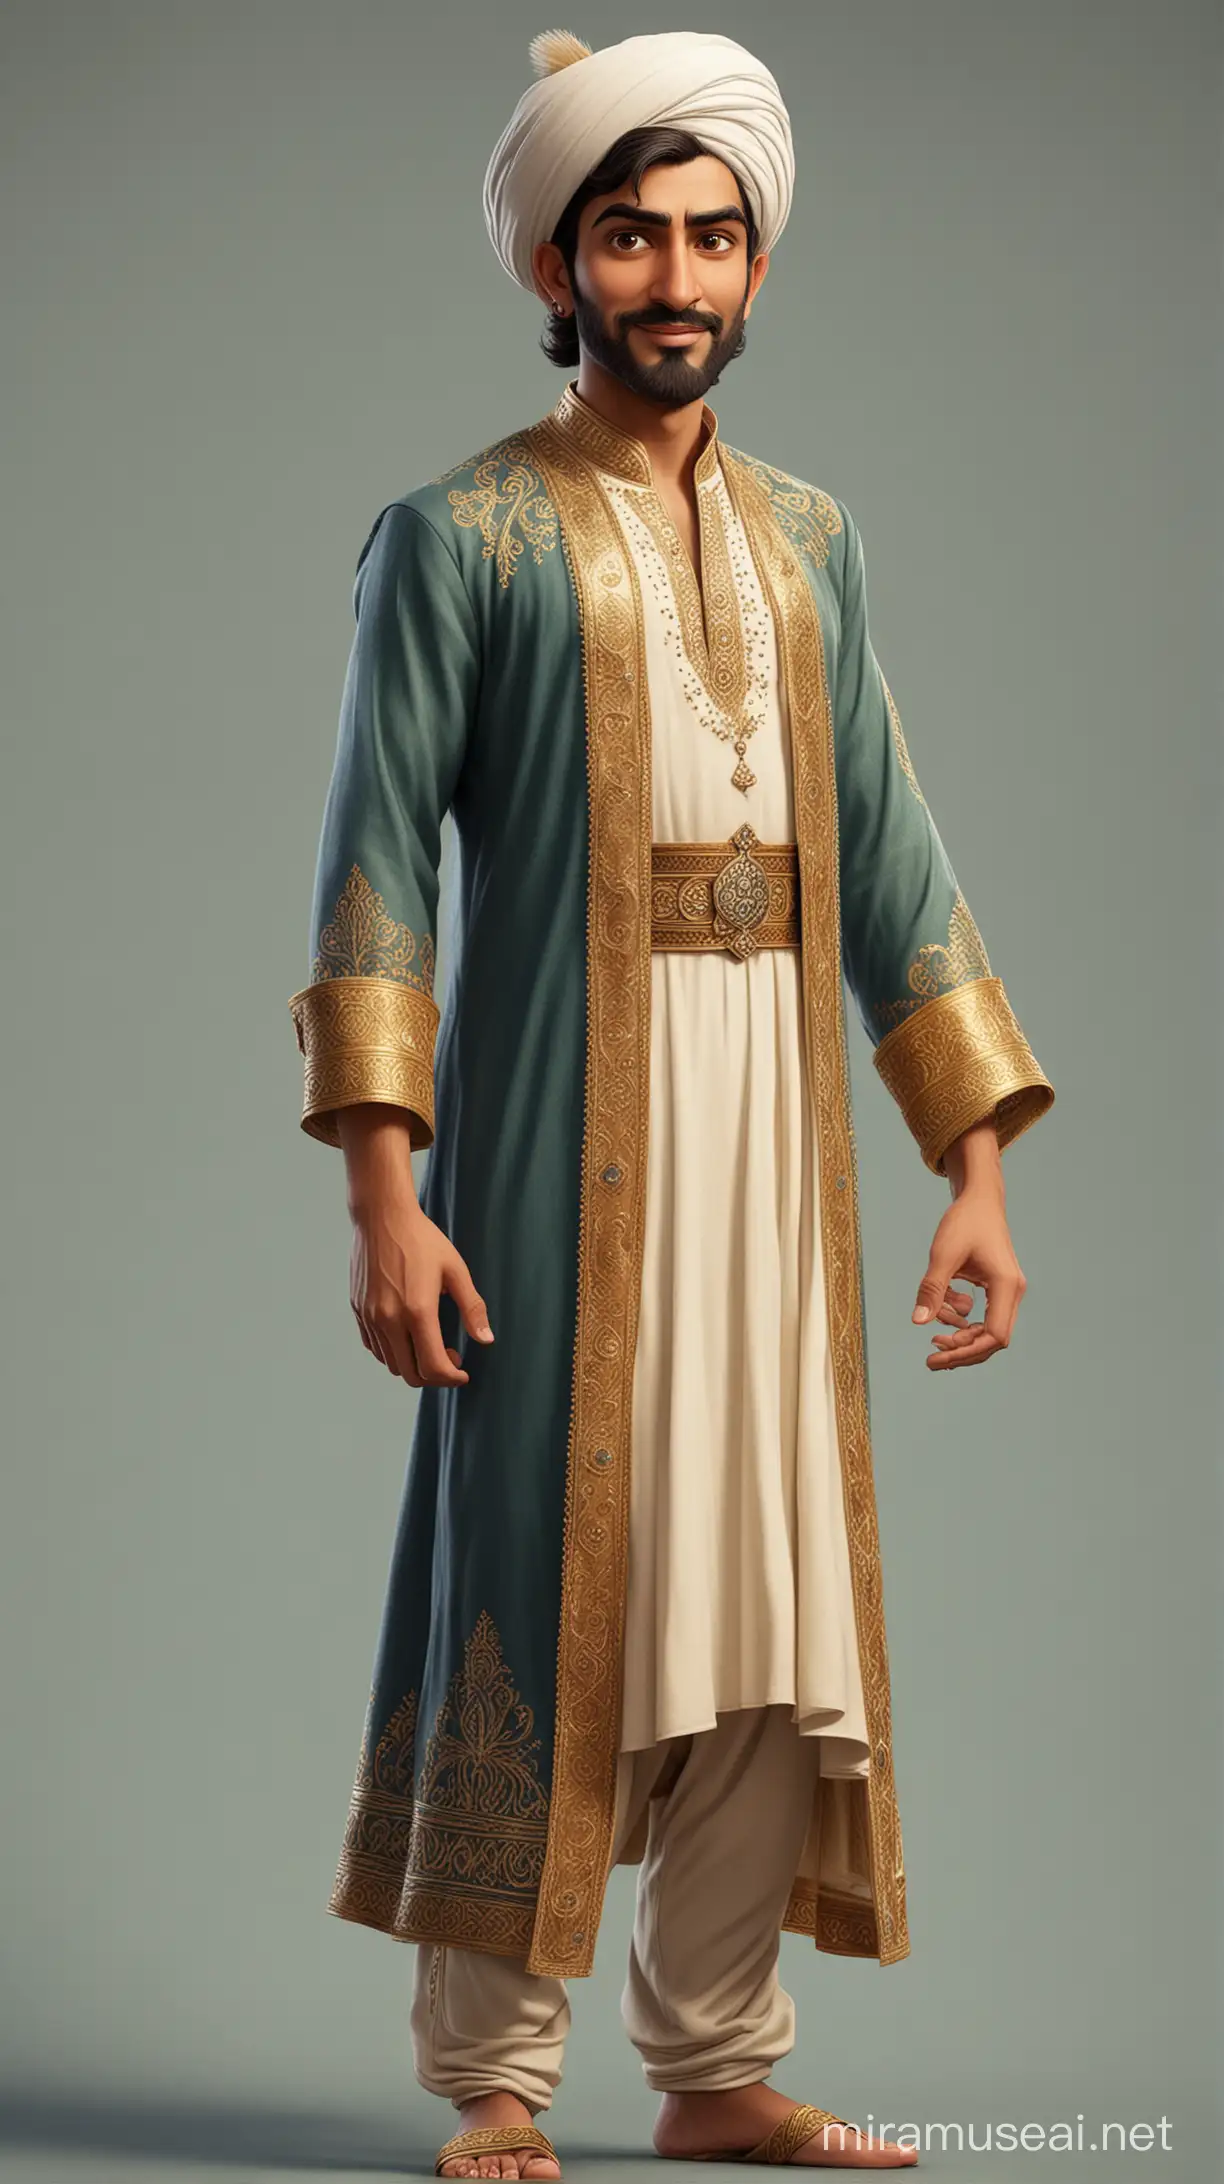 An persian guy, wearing Shahi dress as he is an Islamic king of Bengal, standing up, tall, Semi caricature, disney style, full body